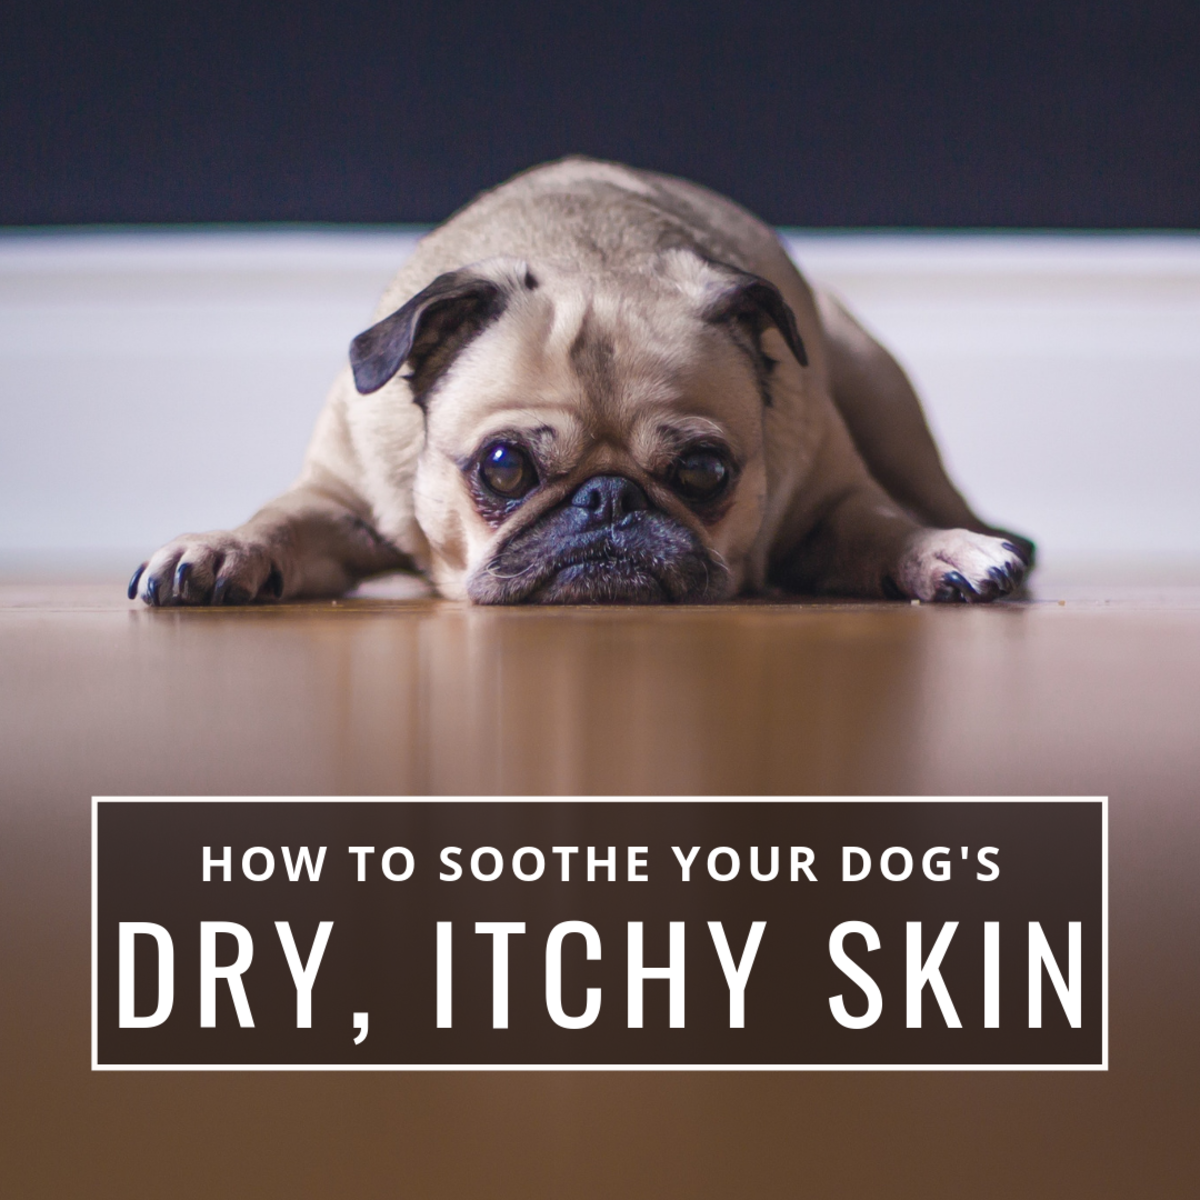 Some dog breeds are prone to dry skin that can make them feel miserable. Luckily, there are things you can do to help.  